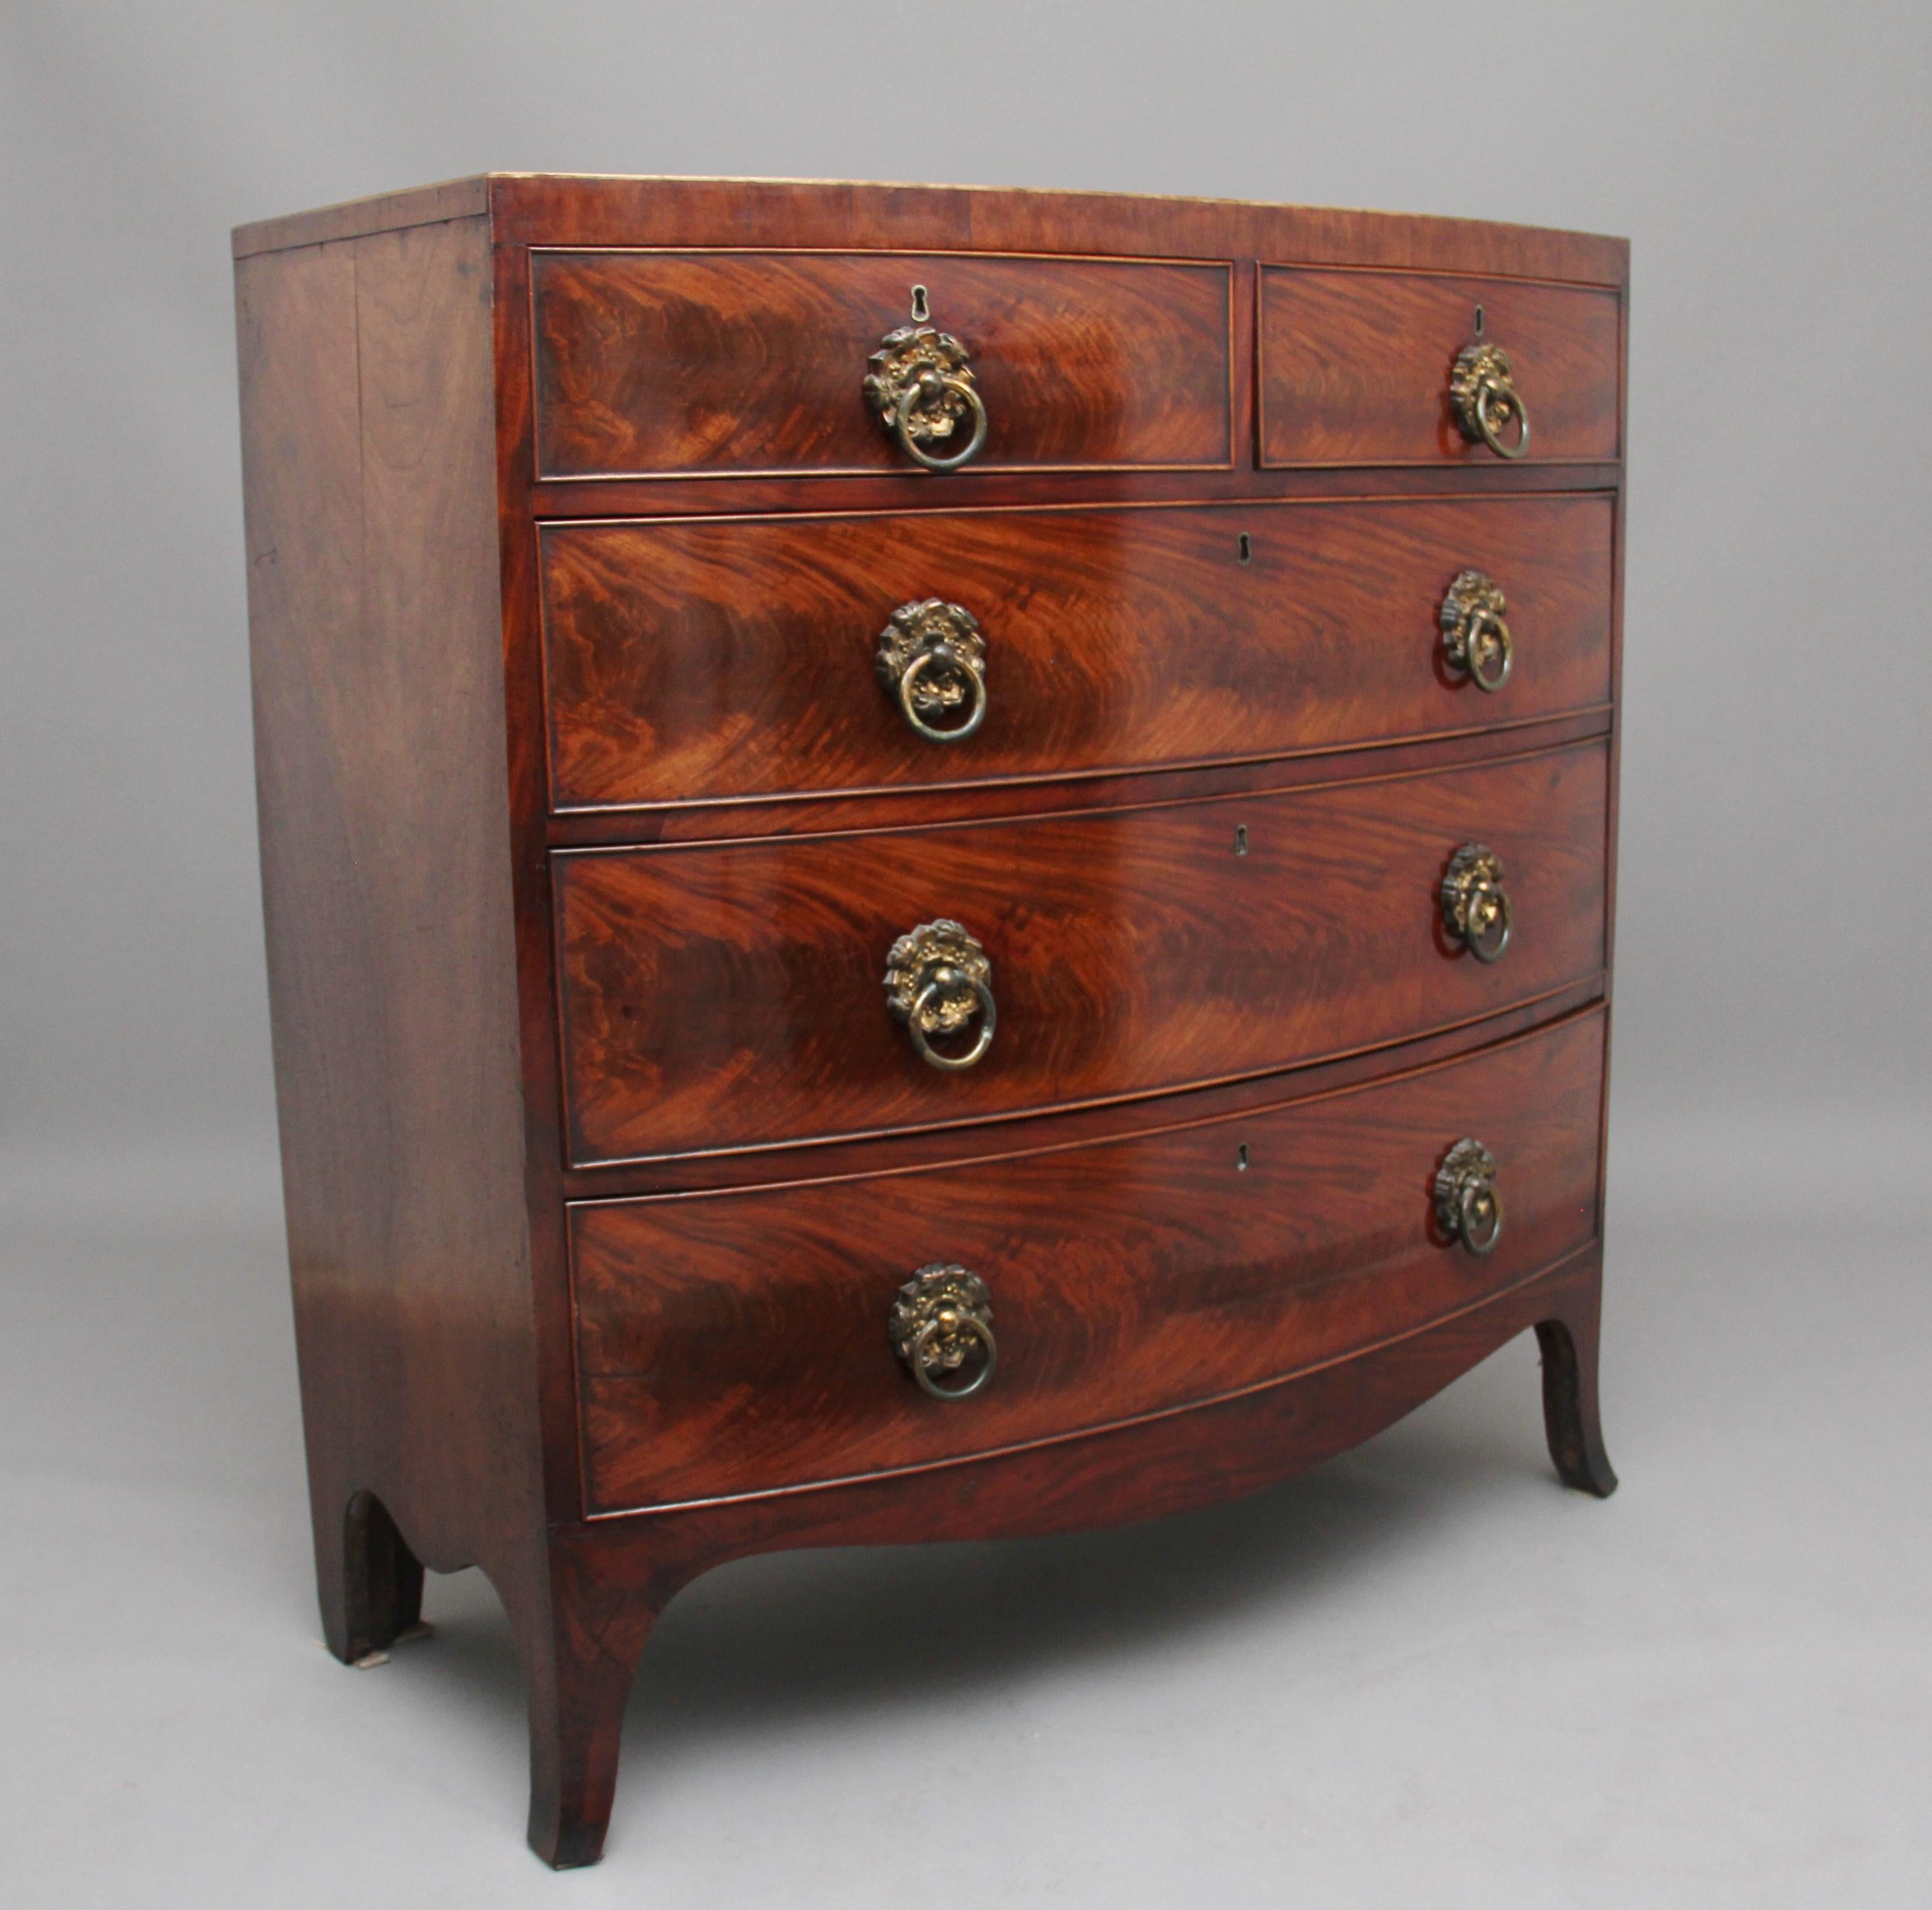 A superb quality early 19th century flame mahogany bowfront chest of drawers, having a nice figured top above a selection of two short over three long graduated drawers, with original engraved brass plate and ring handles, having wonderful flame